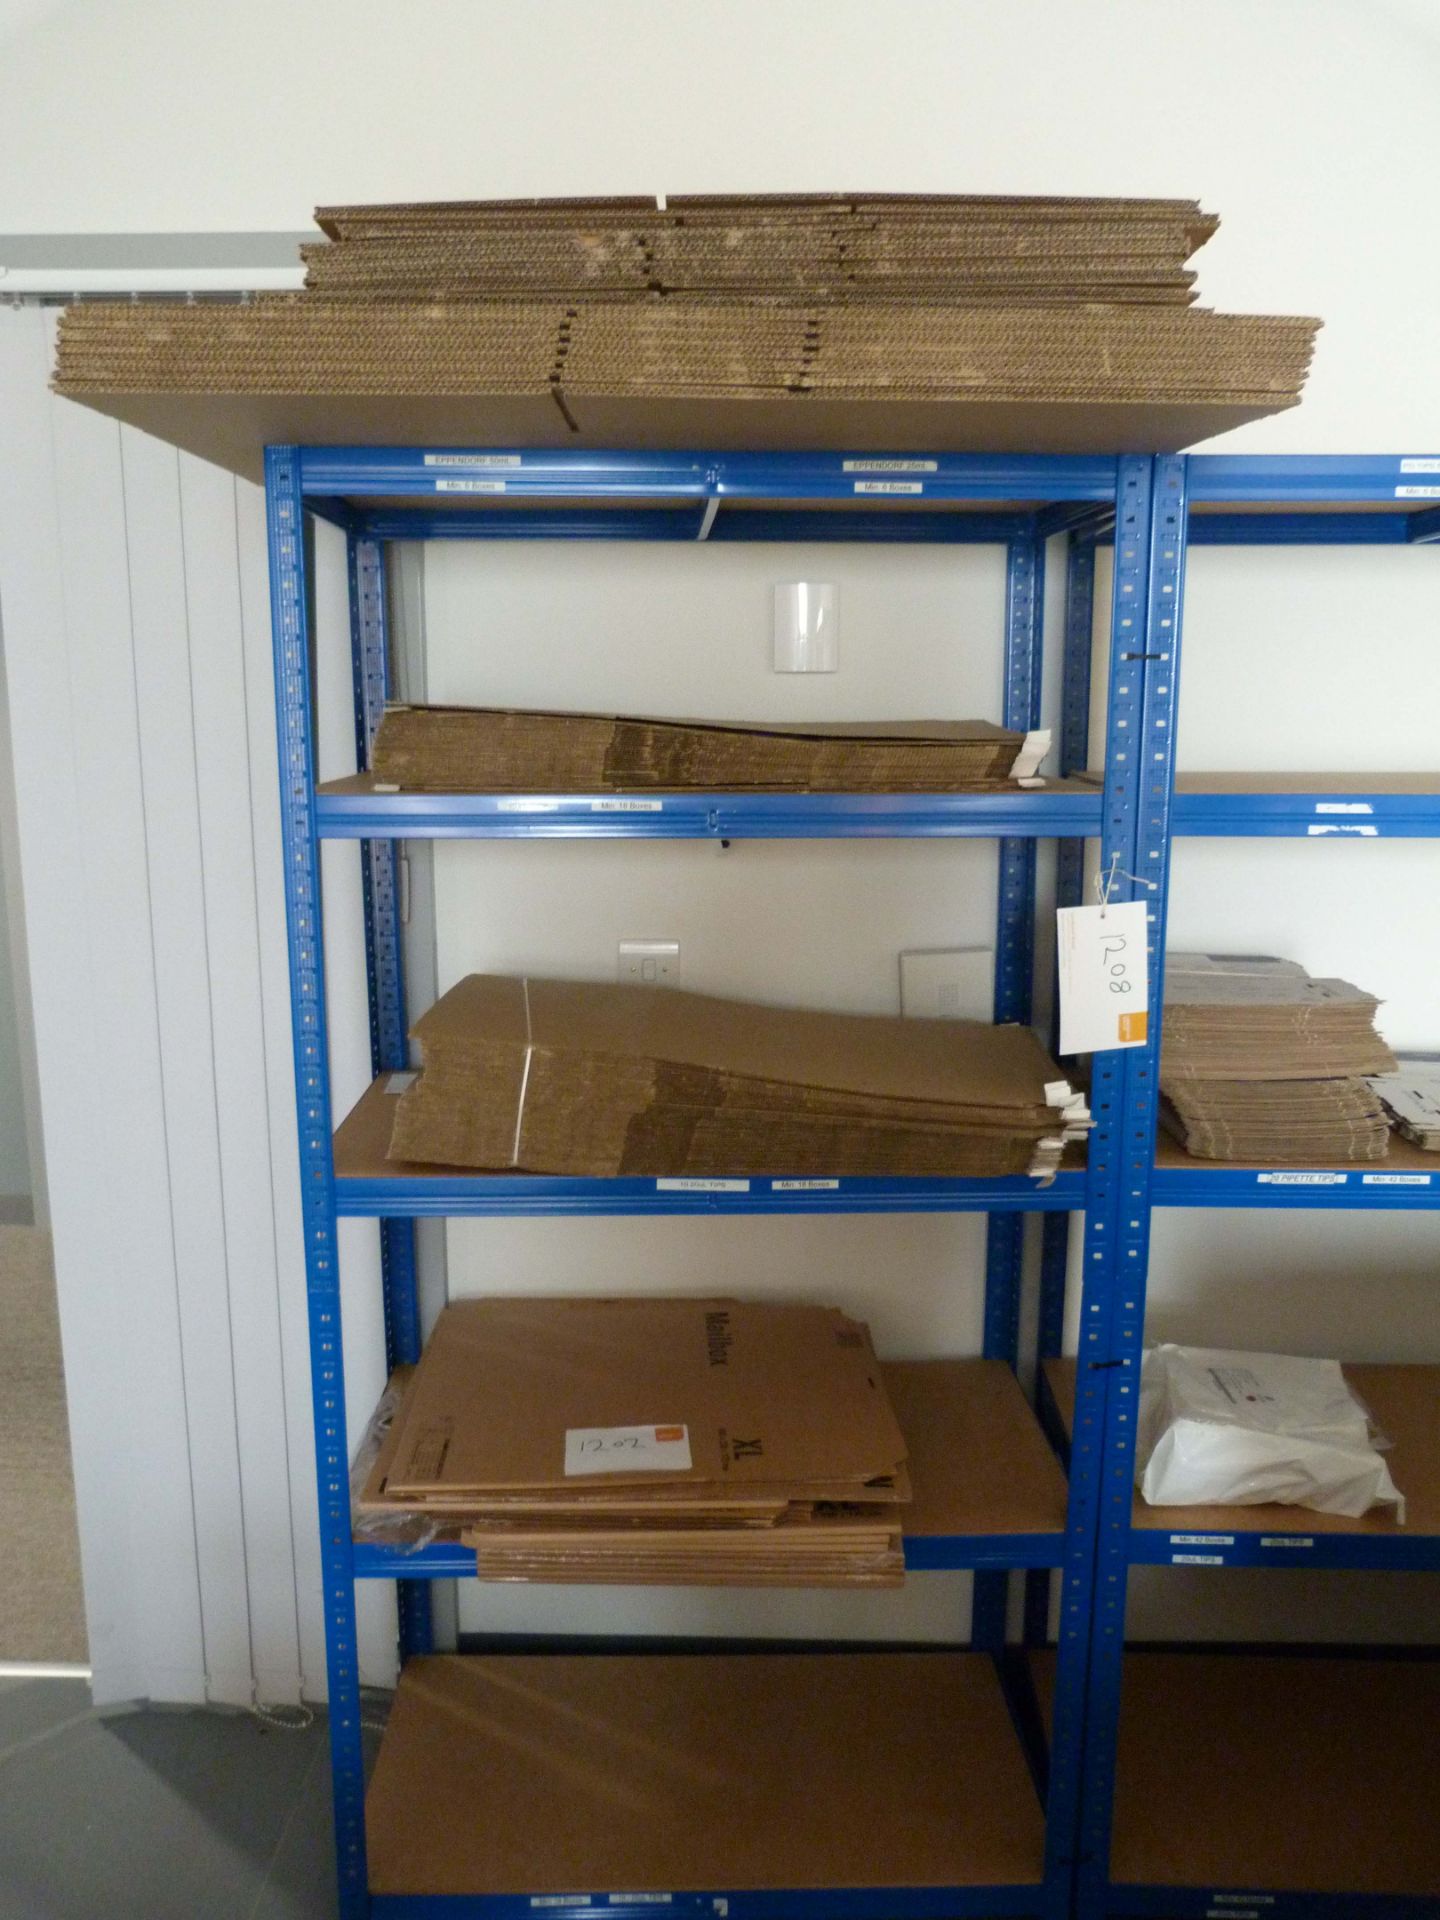 2 Metal Slot Racks with 5 Shelves, 900mm x 435mm x 1800mm h (delivery reserved until 26th May